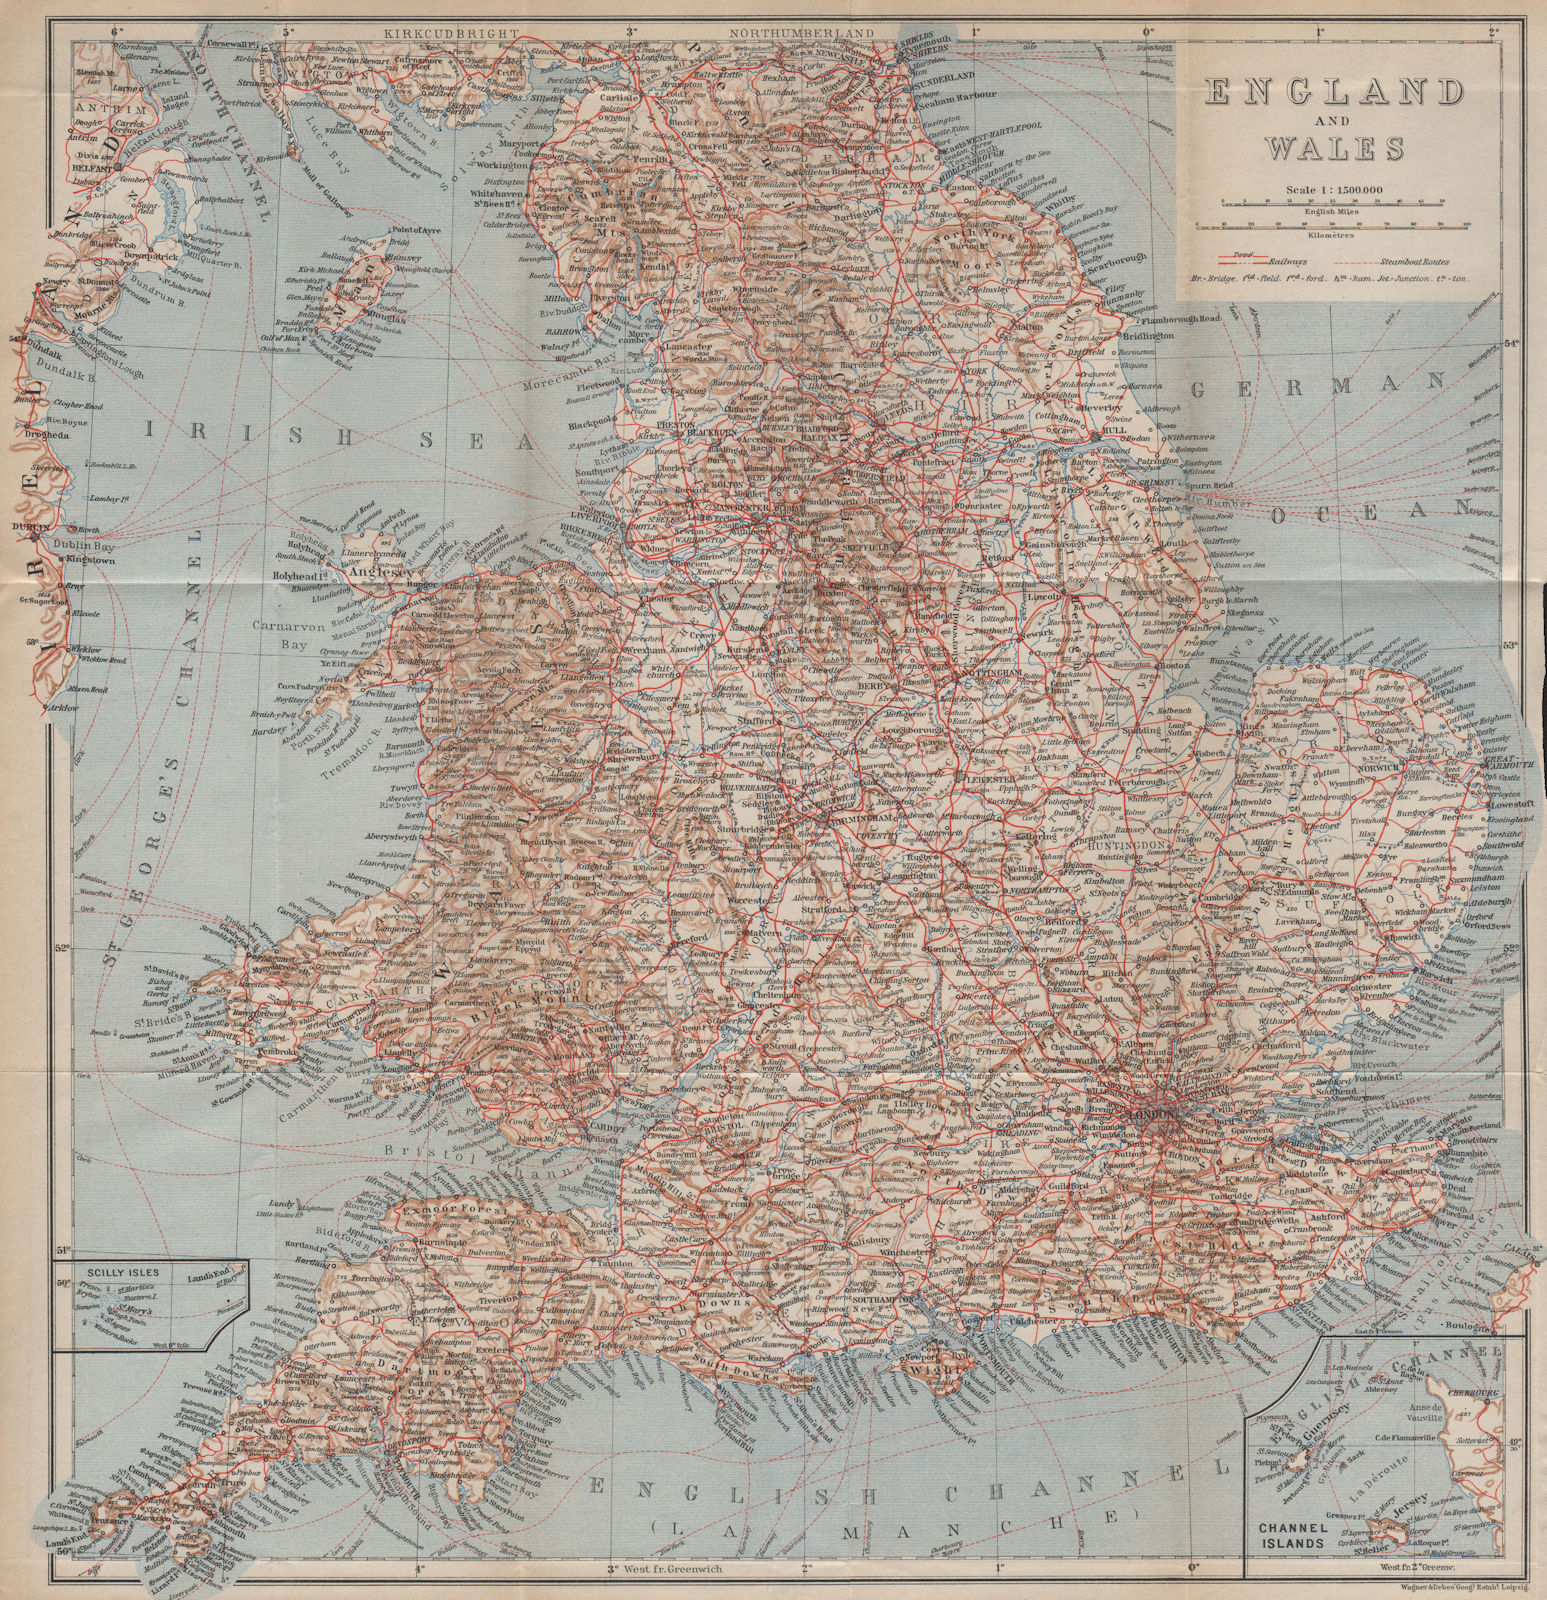 Associate Product ENGLAND AND WALES. Railways and steamboat routes. UK. BAEDEKER 1930 old map